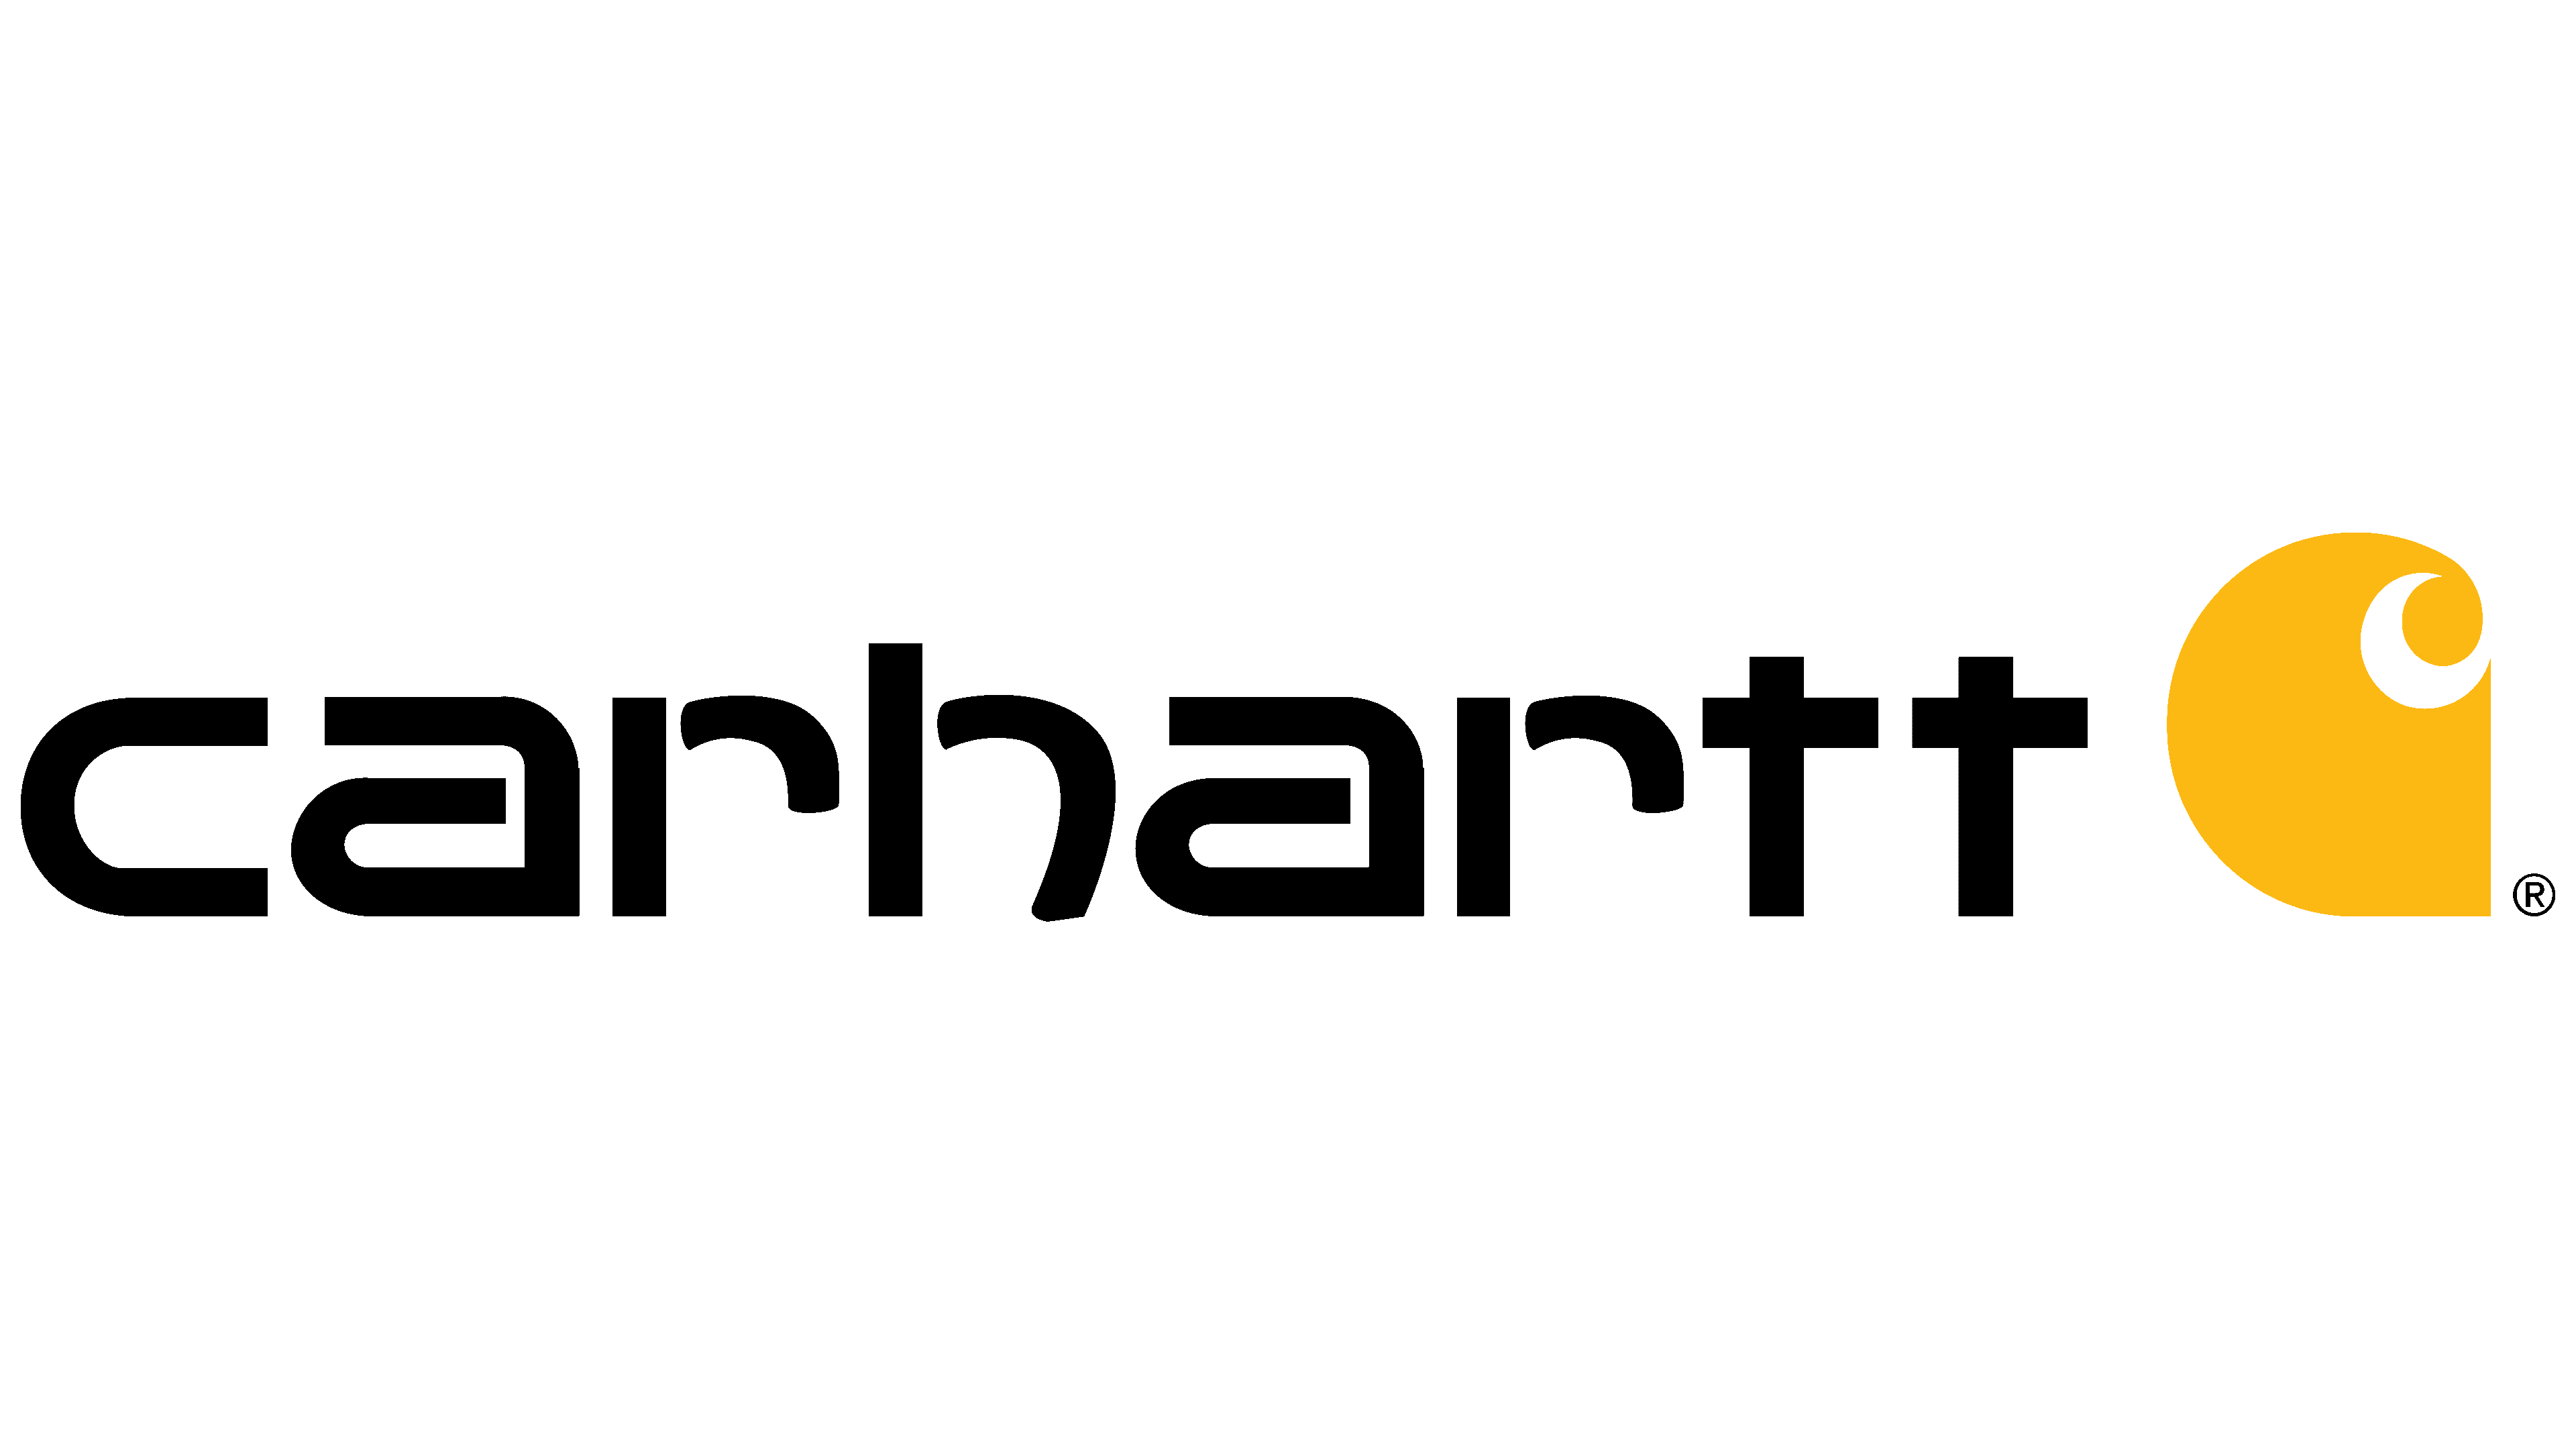 Carhartt Men's Loose Fit Heavyweight Short-sleeve Pocket T-shirt Review: Durable and Comfortable Workwear